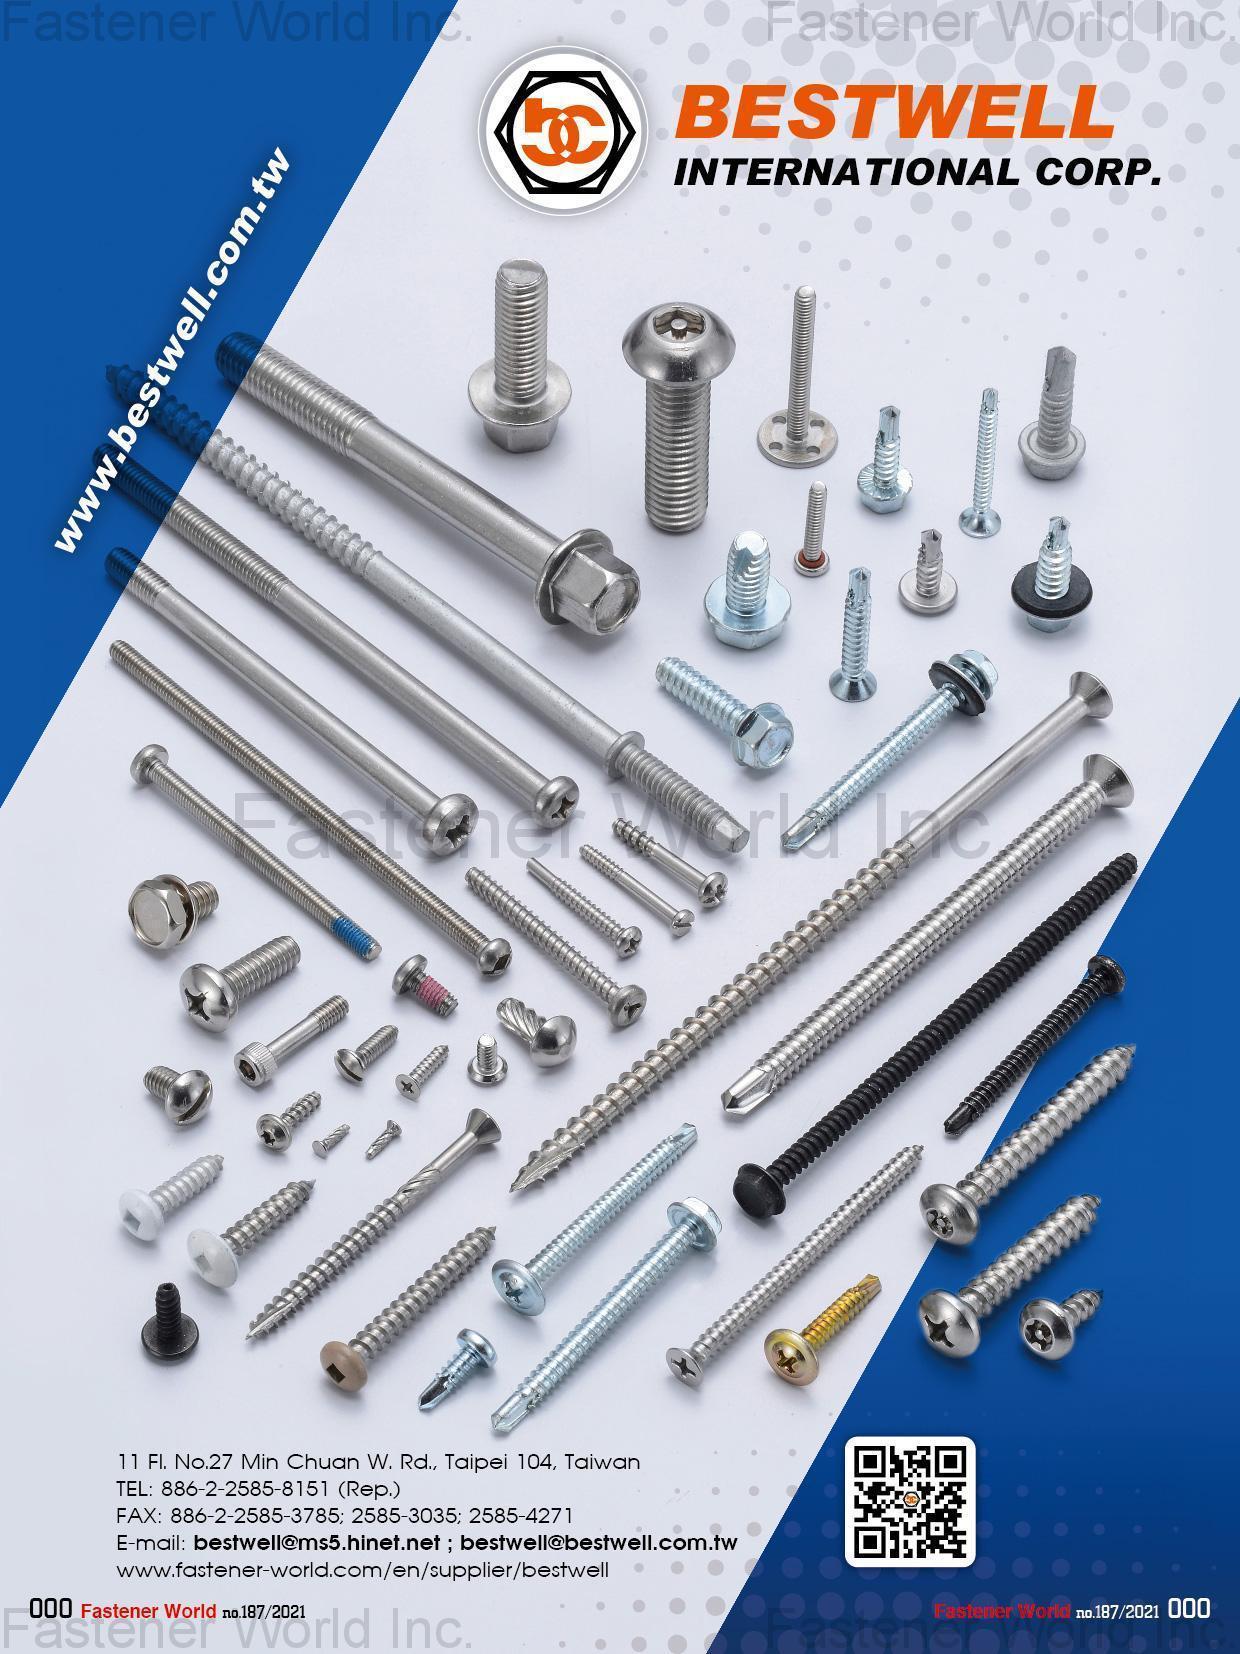 BESTWELL INTERNATIONAL CORP.  , HEX BOLT, SQUARE BOLT, CARRIAGE BOLT, FLANGE BOLT, SOCKET HEAD CAP SCREW, SET SCREW, SHACKLE BOLT, CUP BOLT, ALL THREAD STUD, OVAL NECK, SQUARE NECK, GAS BOLT, T-HEAD BOLT, SINGLE END STUD, T/S & M/S, SELF DRILLING SCREW, DWS & CHIPBOARD SCREW, SCREW WITH BONDER WASHER, SECURITY SCREW, SEM SCREW, SEPCIAL SERRATION SCREW, NUT, LOCK NUT, TEFLON COATING NUT, NON-STANDARD & OTHERS, FLAT WASHER, LOCK WASHER, SQUARE WASHER, SOLID WASHER, ANCHOR, STAMPING, SPECIAL FASTENERS, D-RING & RINGS, CNC ITEMS, WIRE MESH, BUTT SEAM SPACER, PLASTIC OR RUBBER PARTS, POWDER METALLURGY, SPRING & CLIP